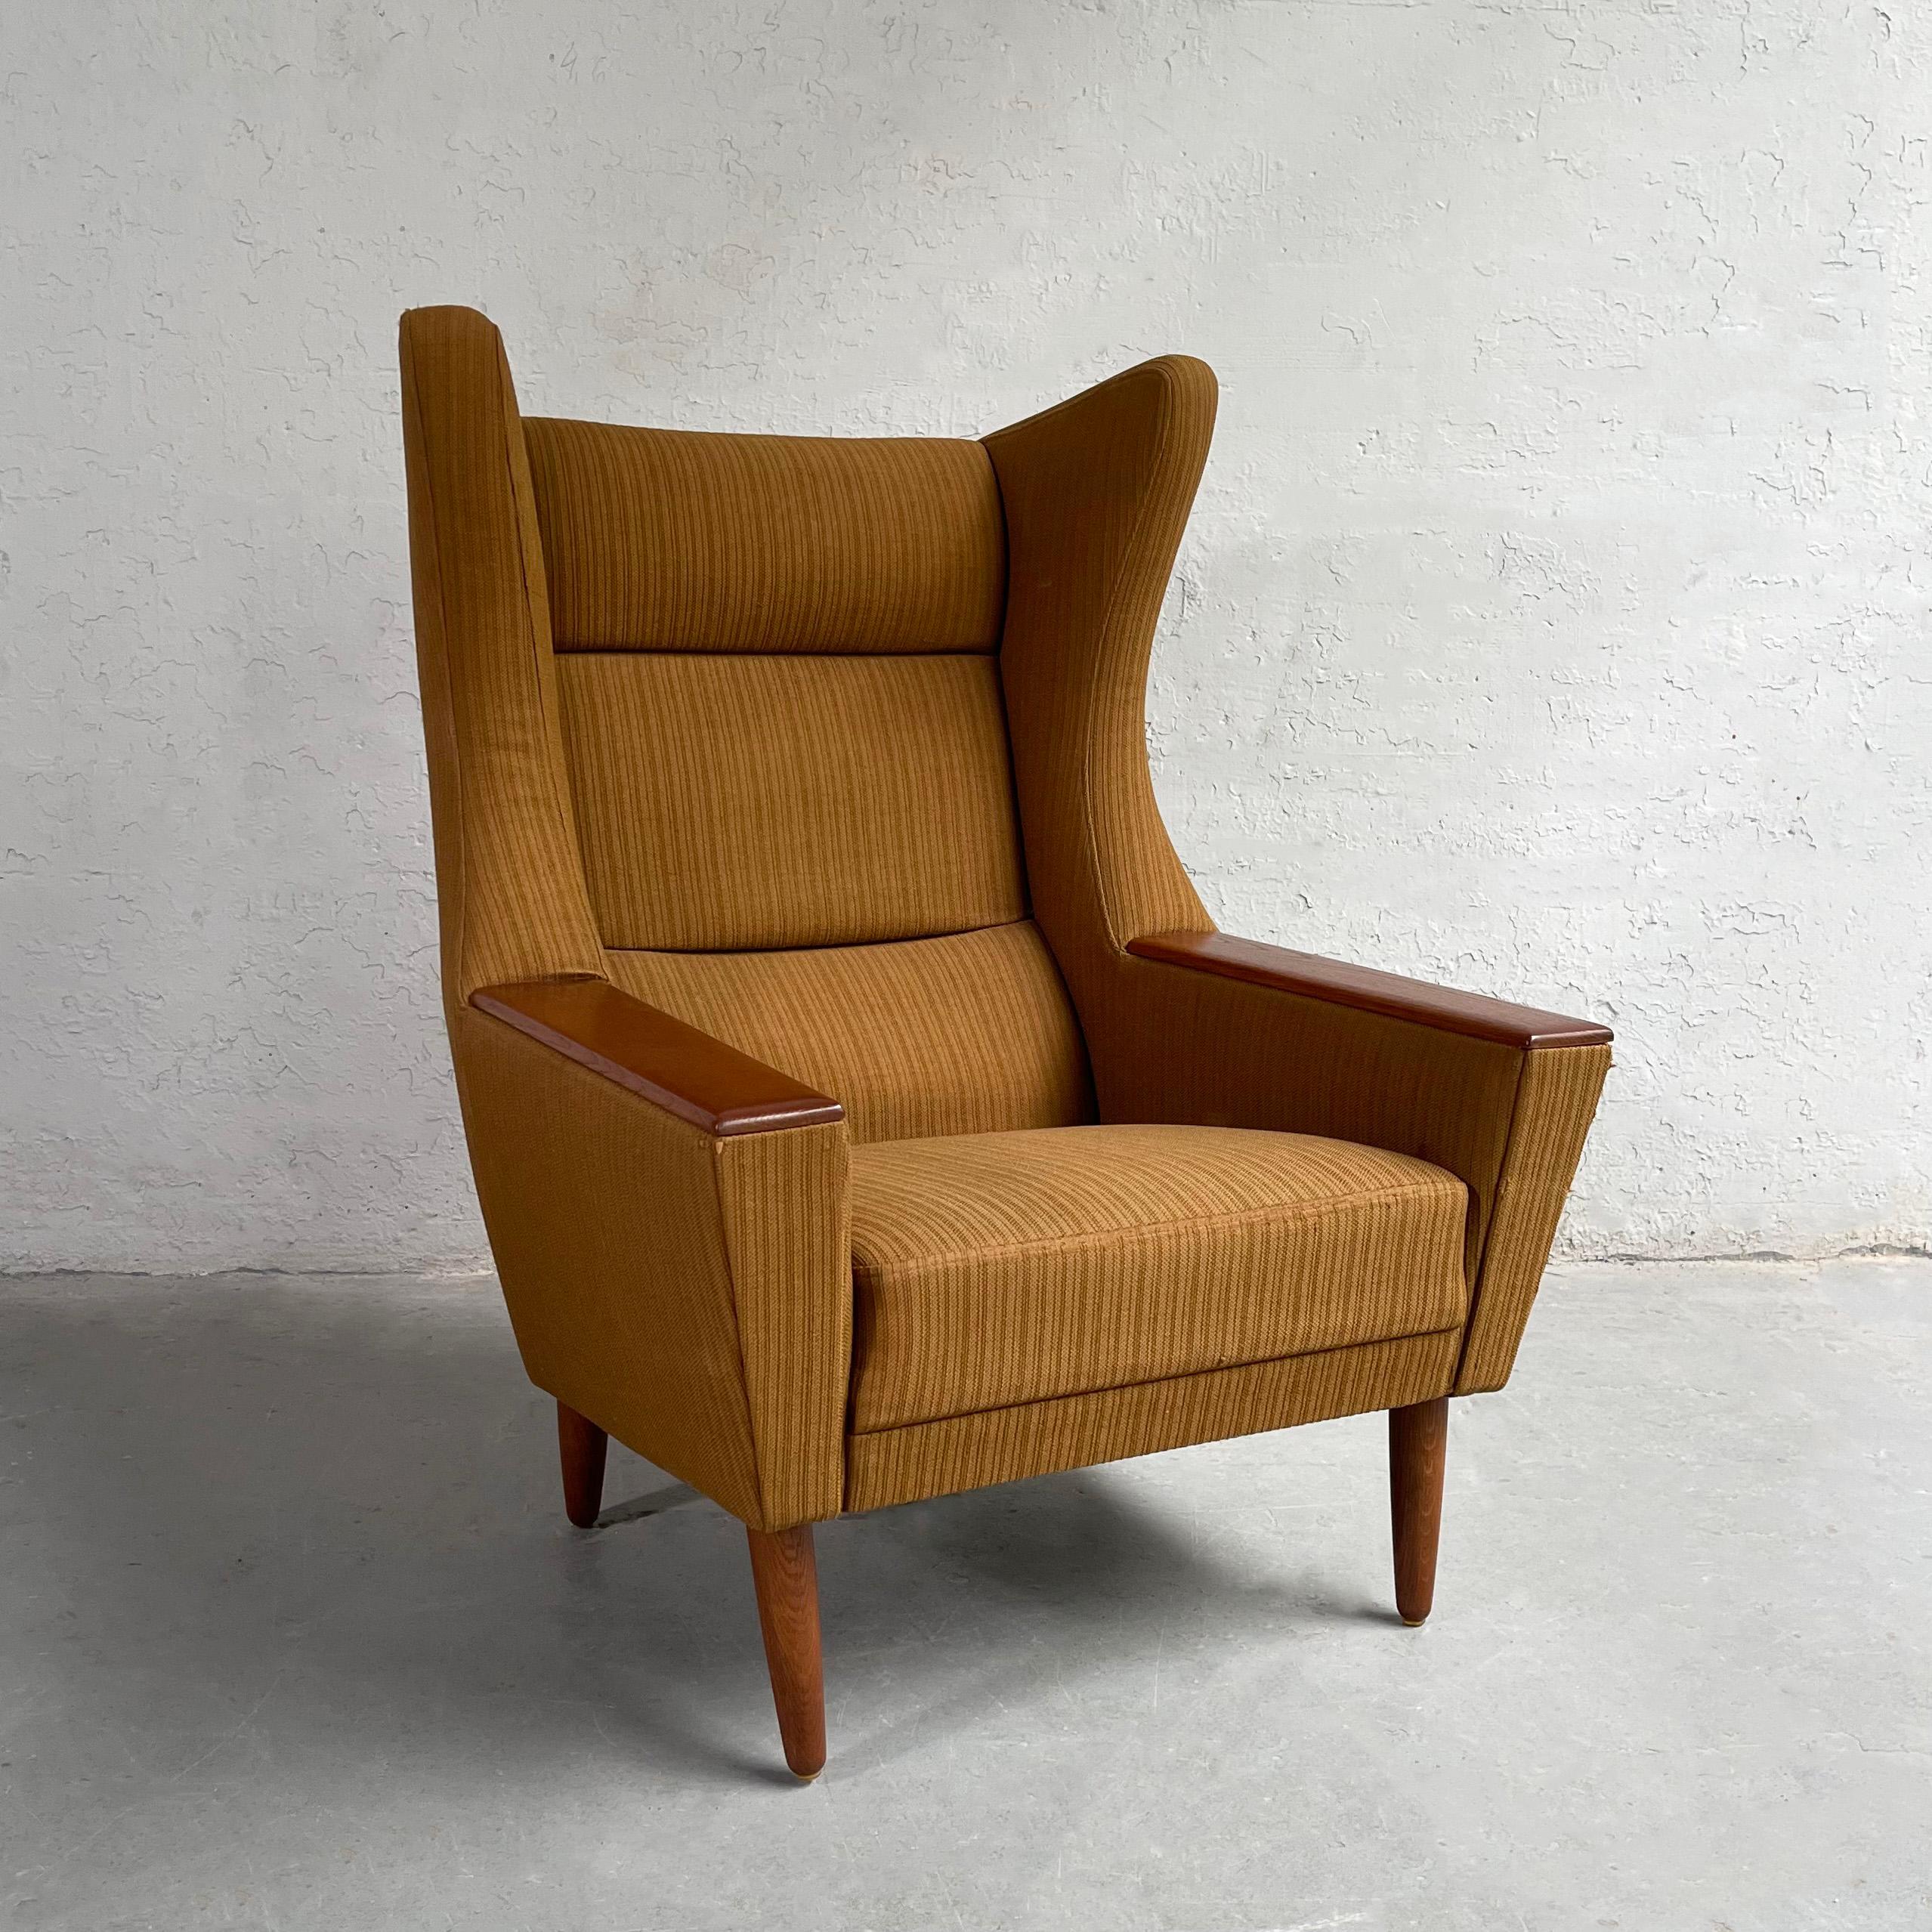 Cozy and enveloping, Mid-Century Modern, wingback lounge chair boasts a striking Silhouette from all angles. The chair features it's original ribbed wool upholstery with oak armrests and tapered legs.